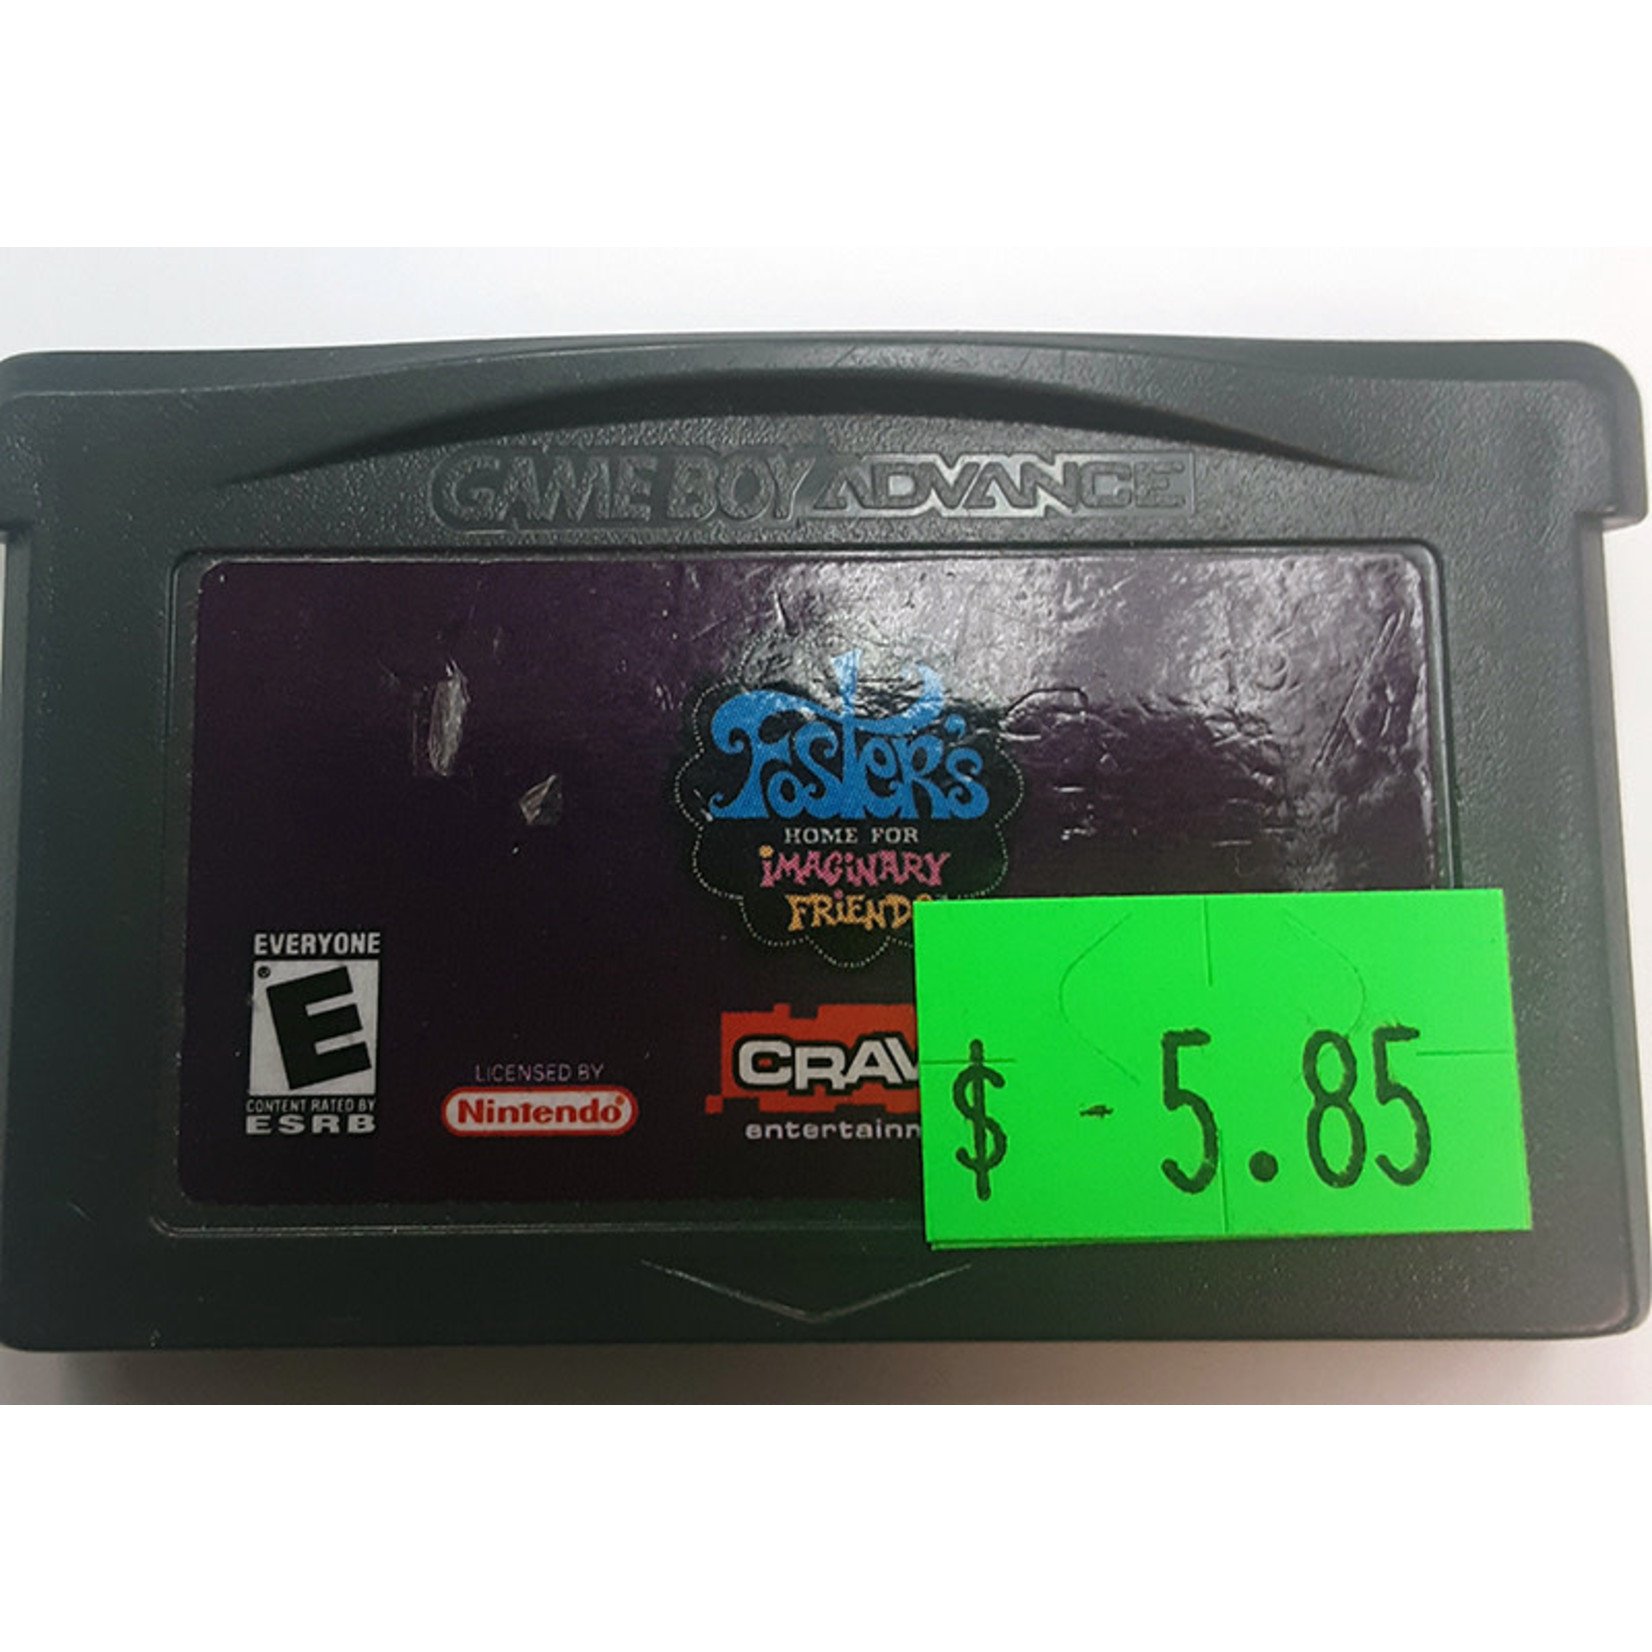 GBAu-Foster's Home for Imaginary Friends (cartridge)